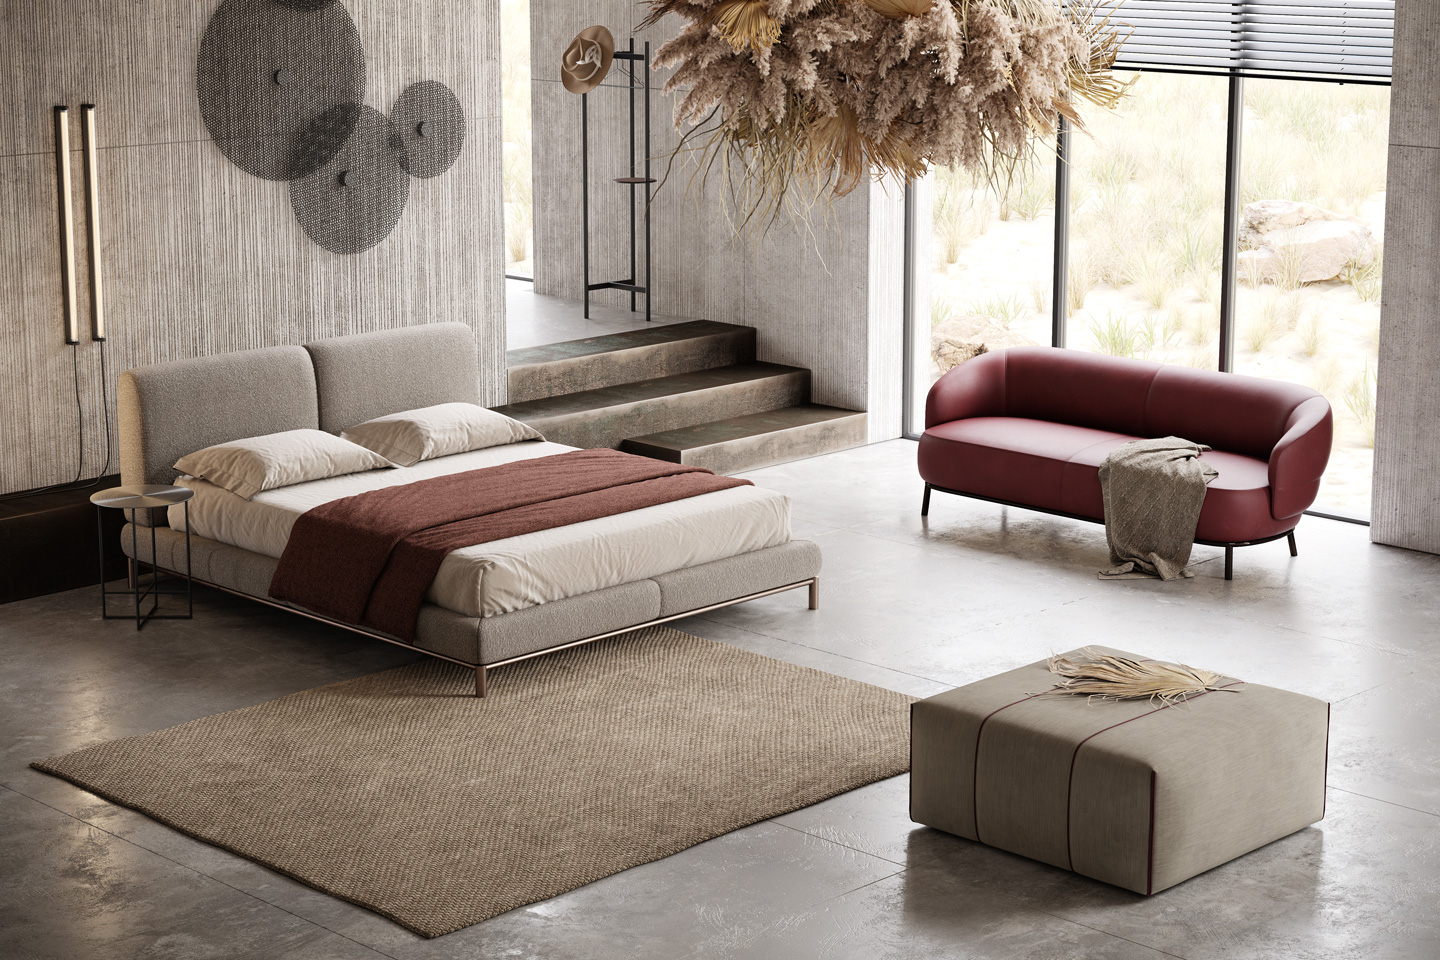 #Furniture design brand Domkapa is back at Maison et Objet 2022 with a stunning new collection